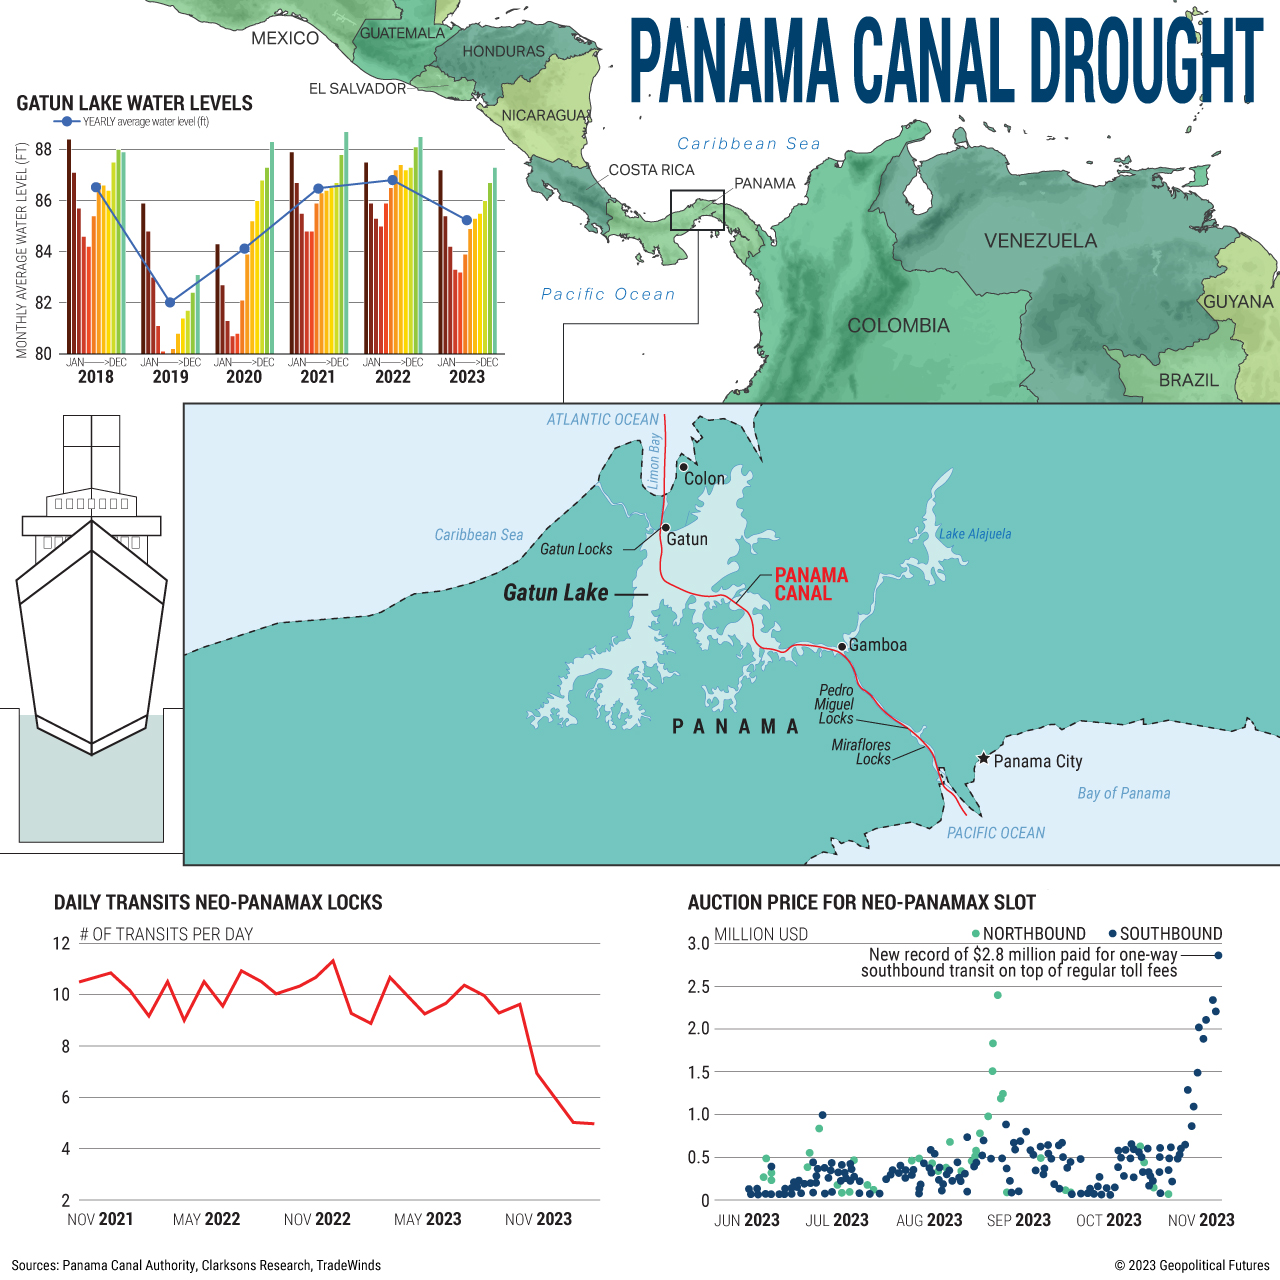 The Panama Canal Drought